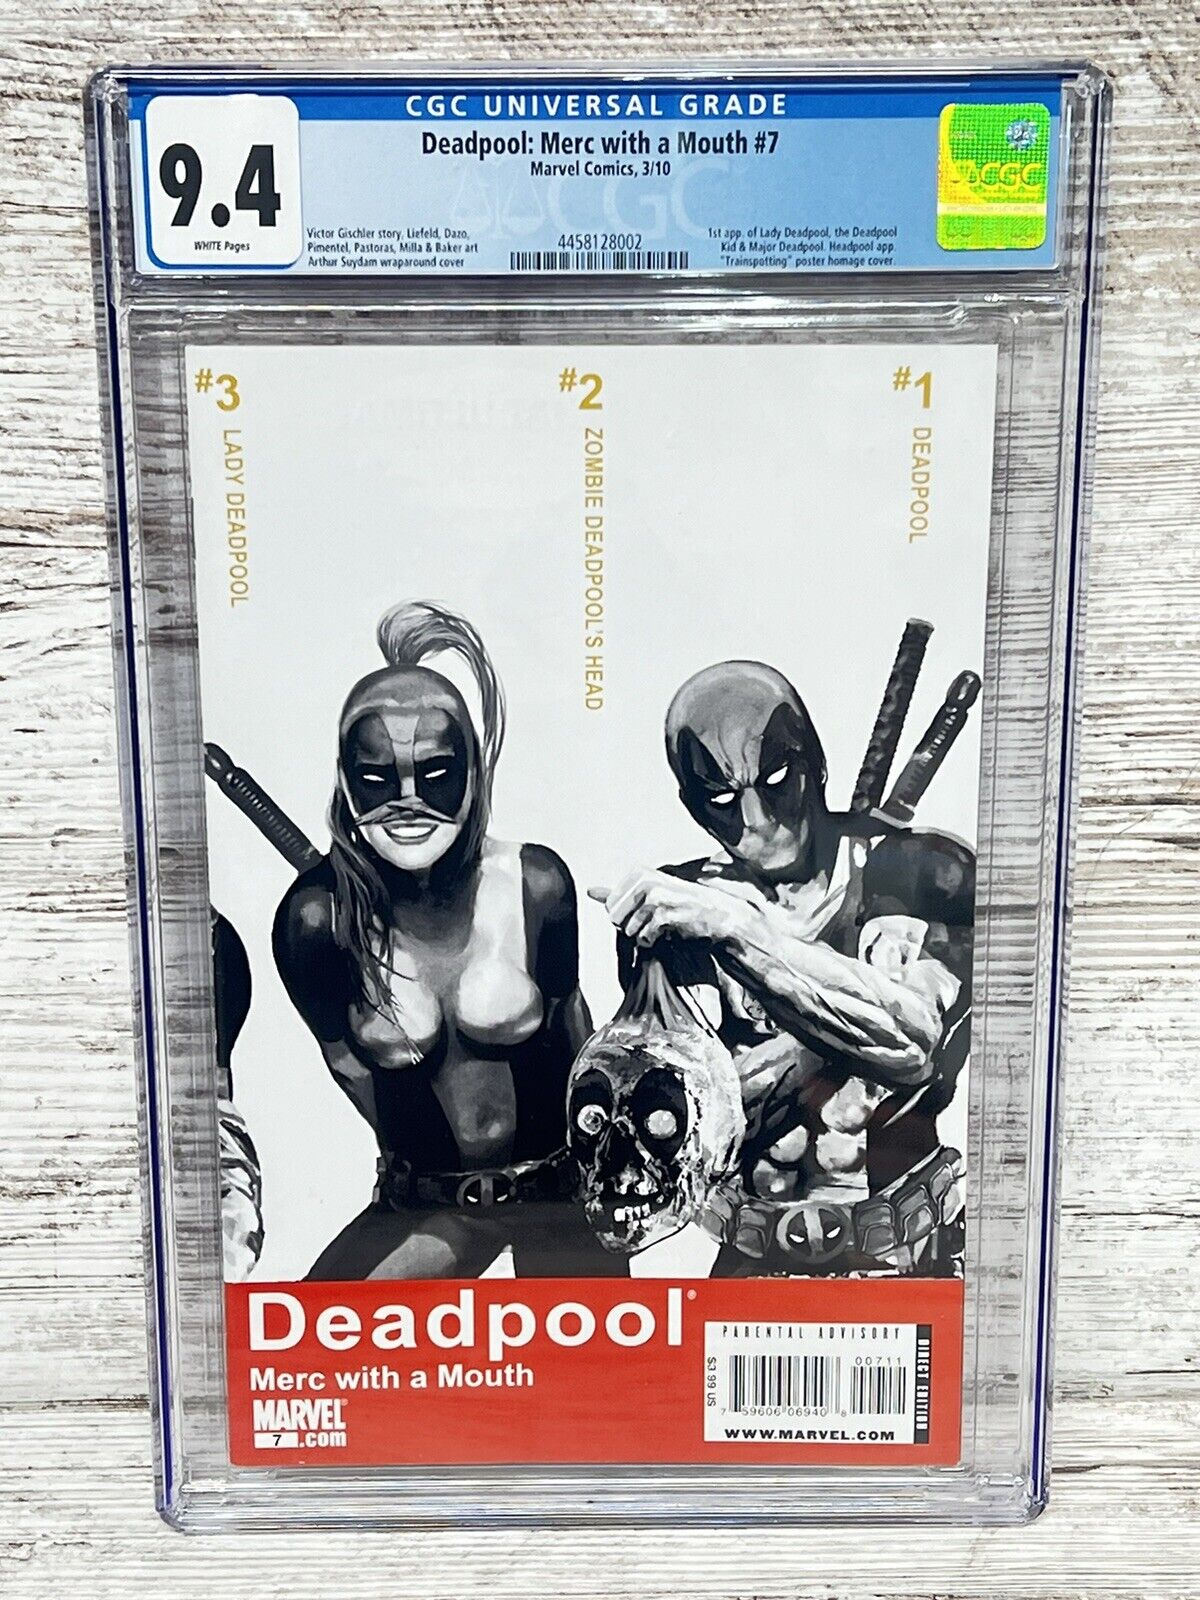 Deadpool: Merc with a Mouth #7 CGC 9.4 NM 1st Appearance of Lady Deadpool MCU